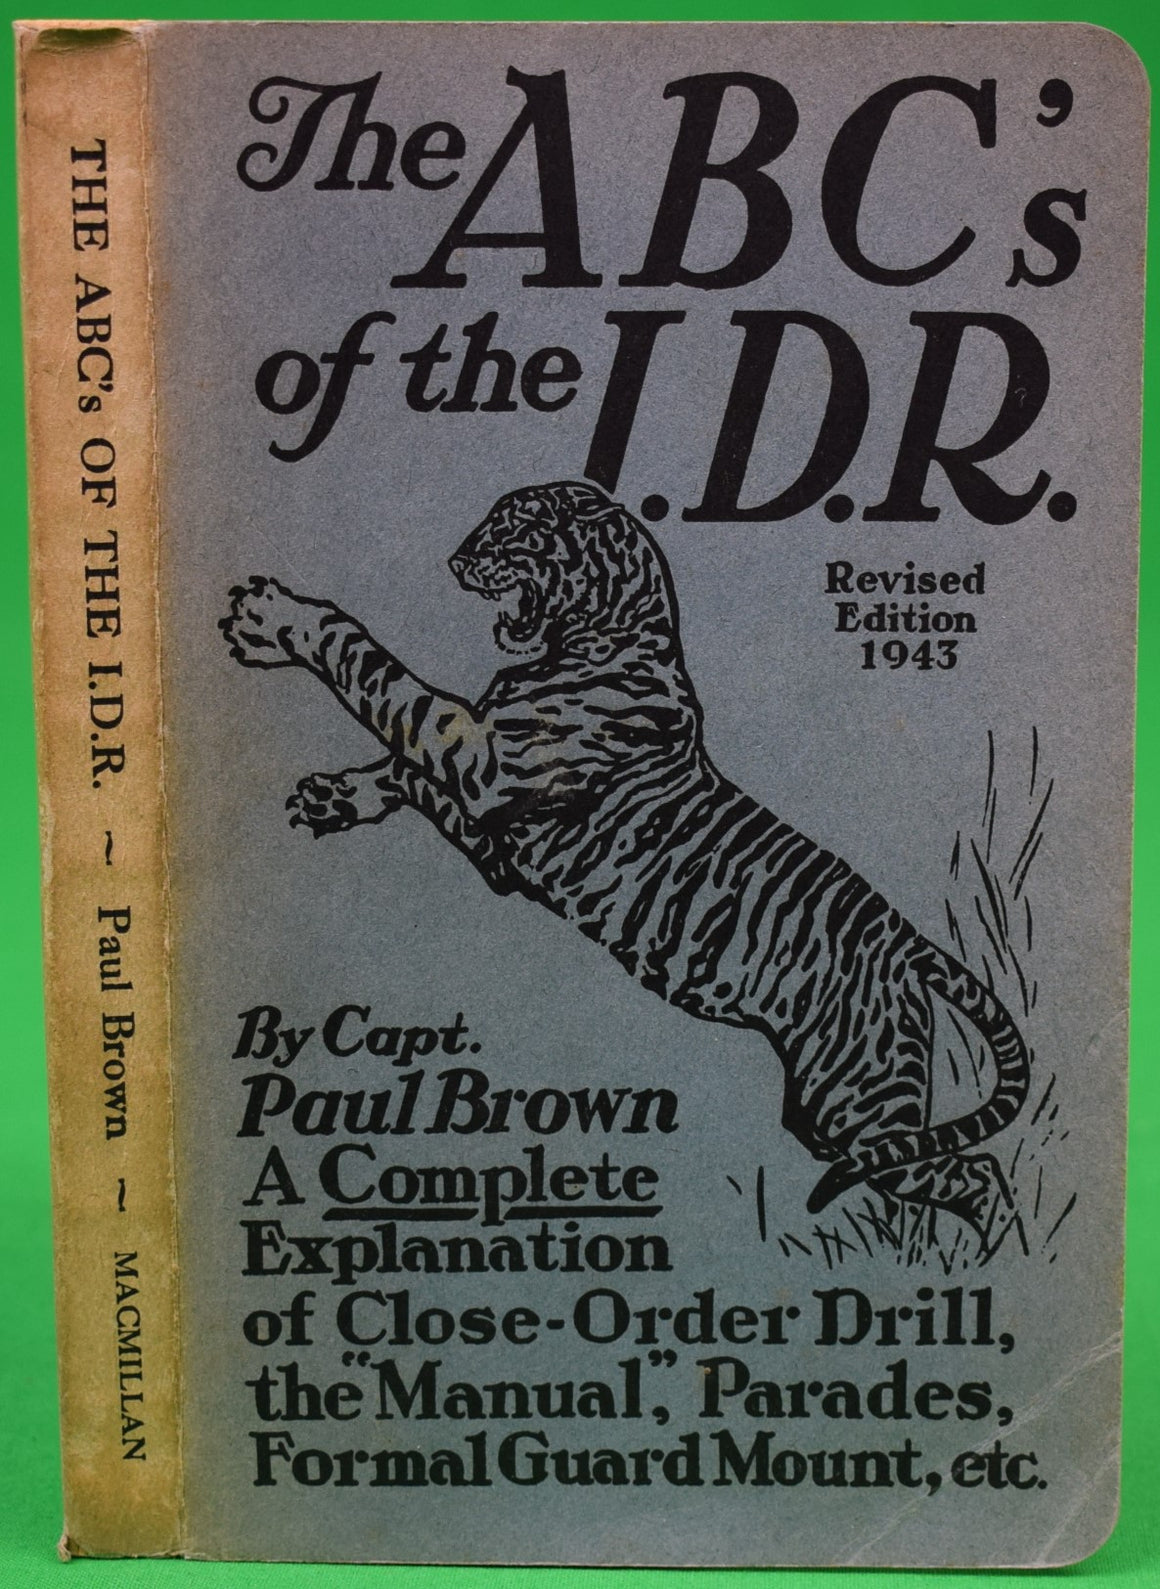 "The ABC's Of The I.D.R." 1943 BROWN, Capt. Paul